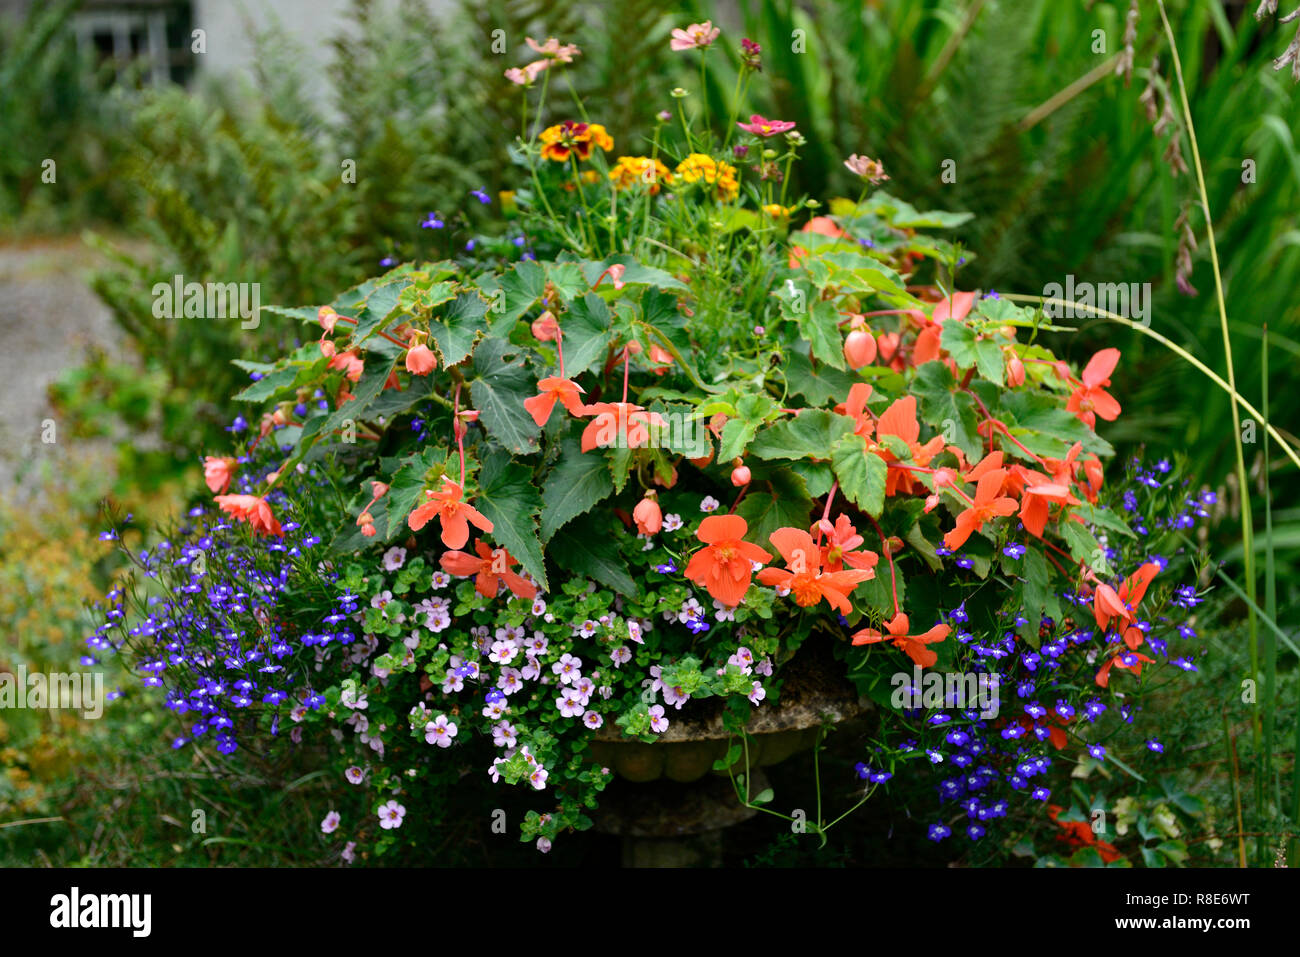 lobelia,bacopa,begonia,blue,orange,red,yellow,flower,flowers,display,urn,formal,garden,gardening,mix,mixed,container,planter,foliage,RM Floral Stock Photo